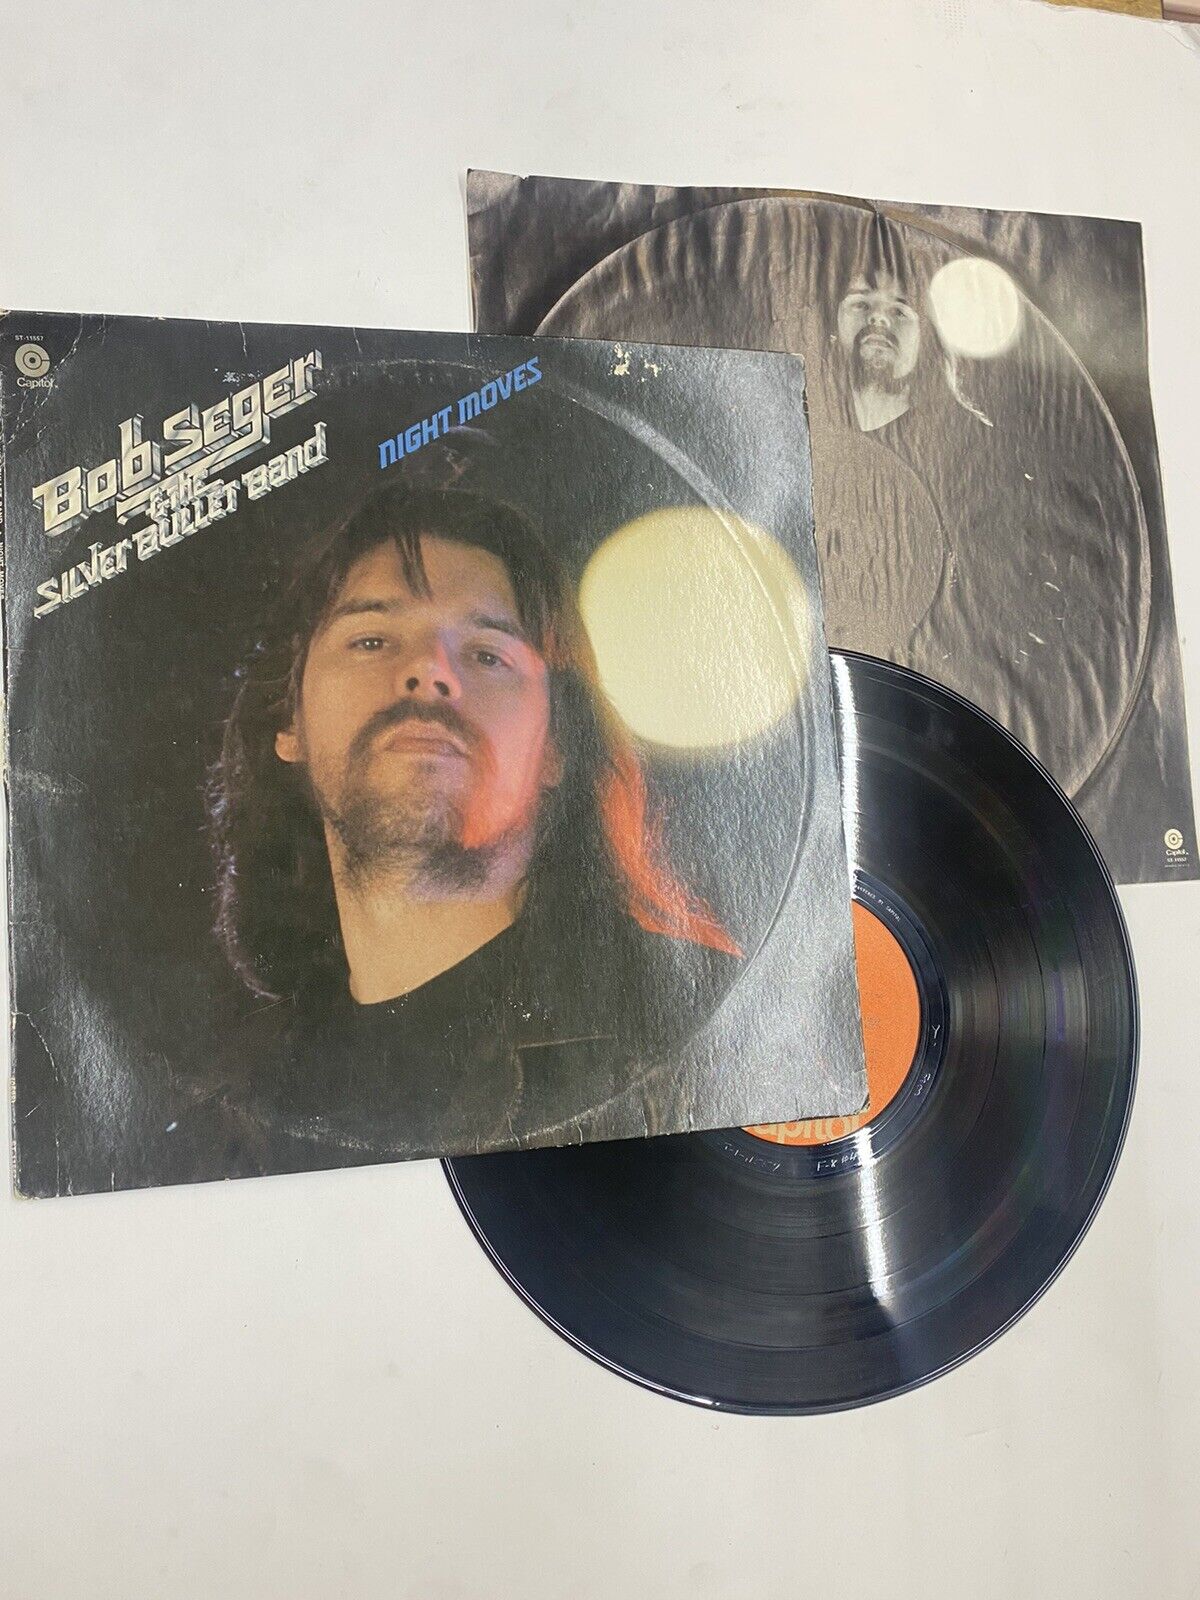 Bob Seger and the Silver Bullet - Band Night Moves Vinyl LP Record 1976 ST-11557